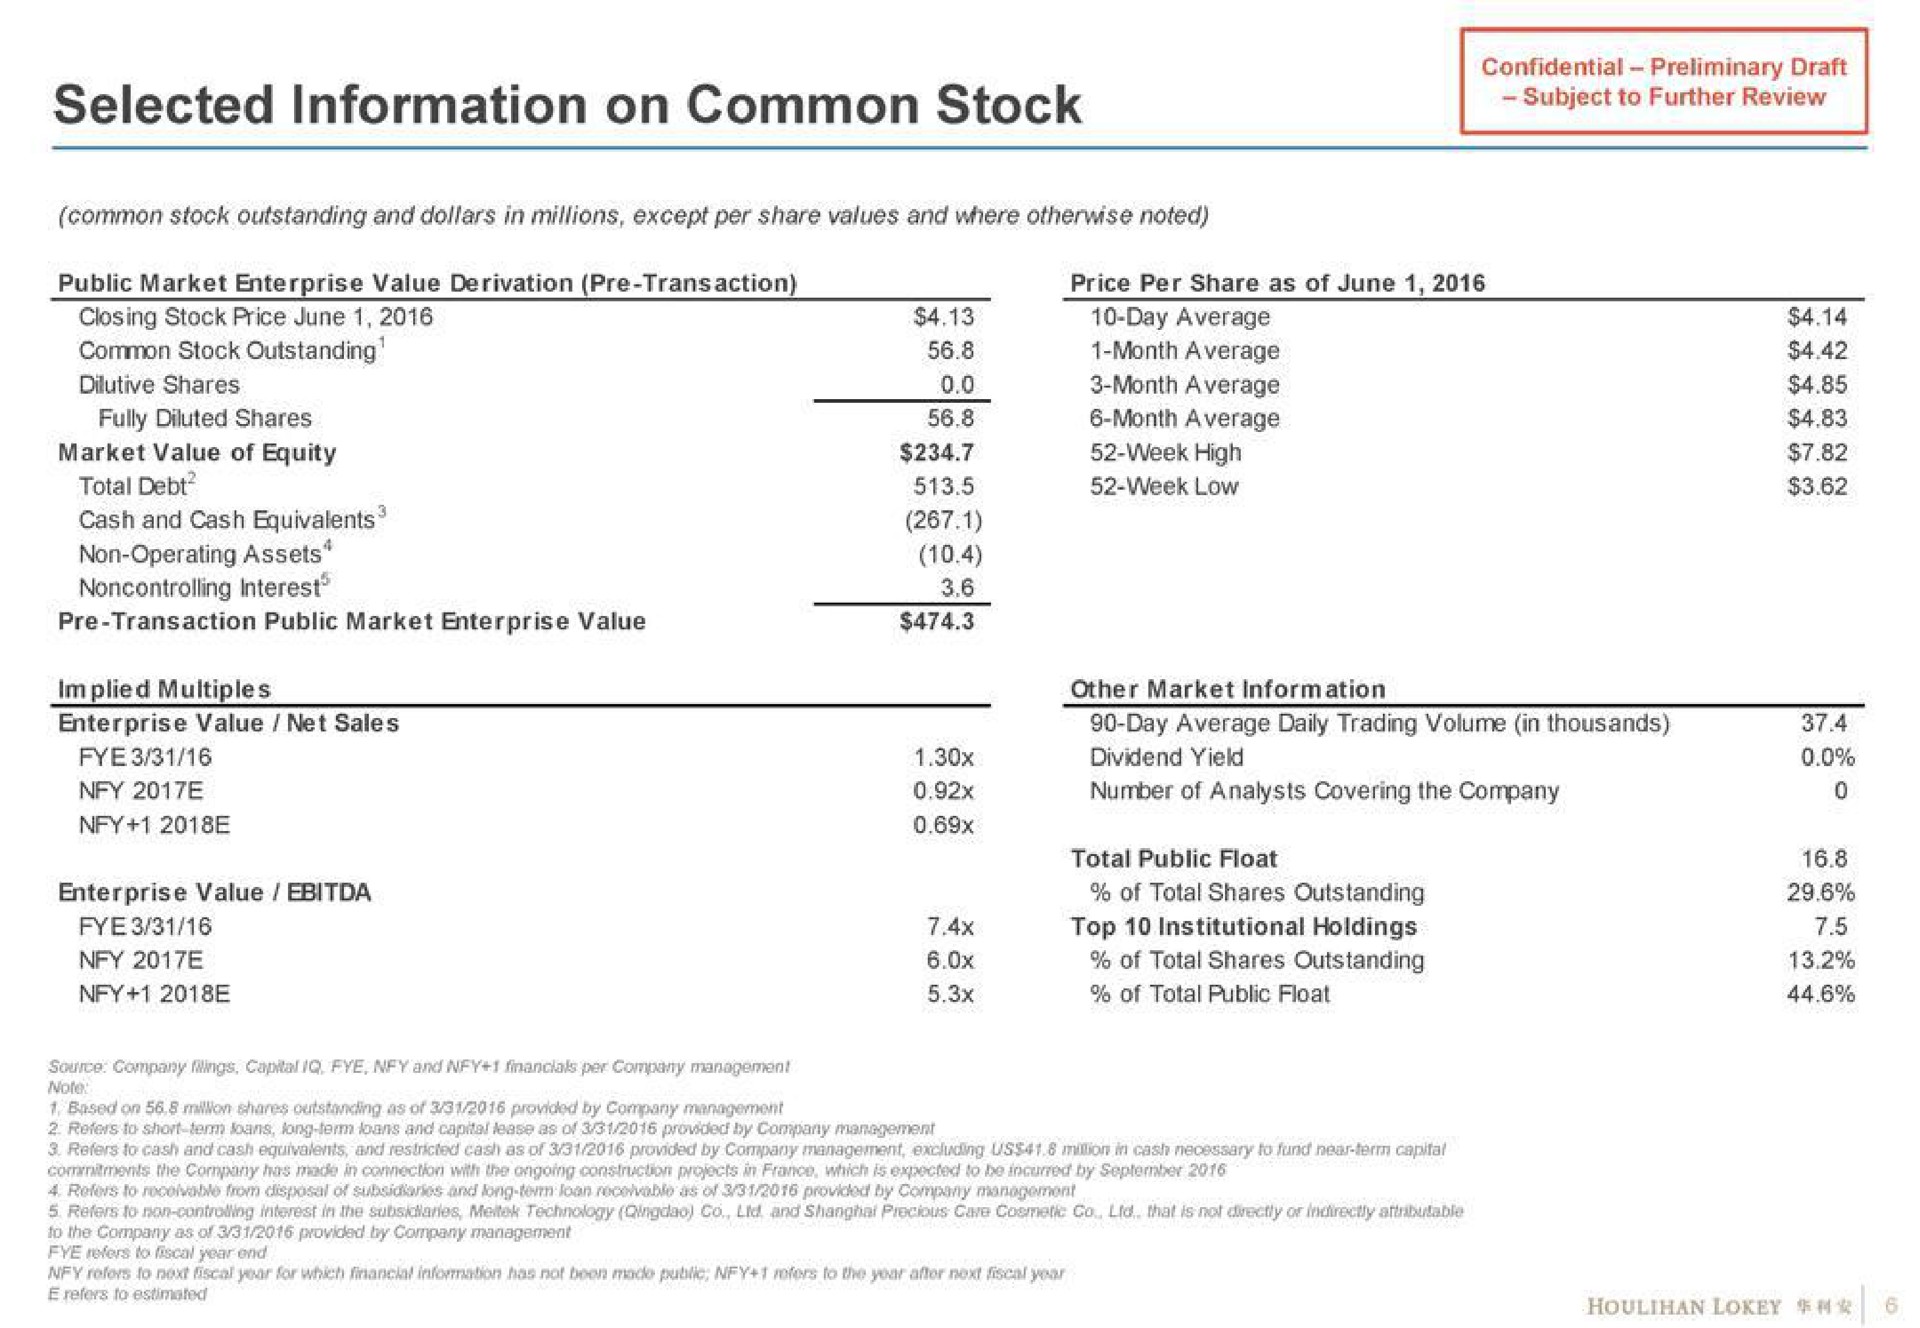 selected information on common stock total debt noncontrolling interest | Houlihan Lokey